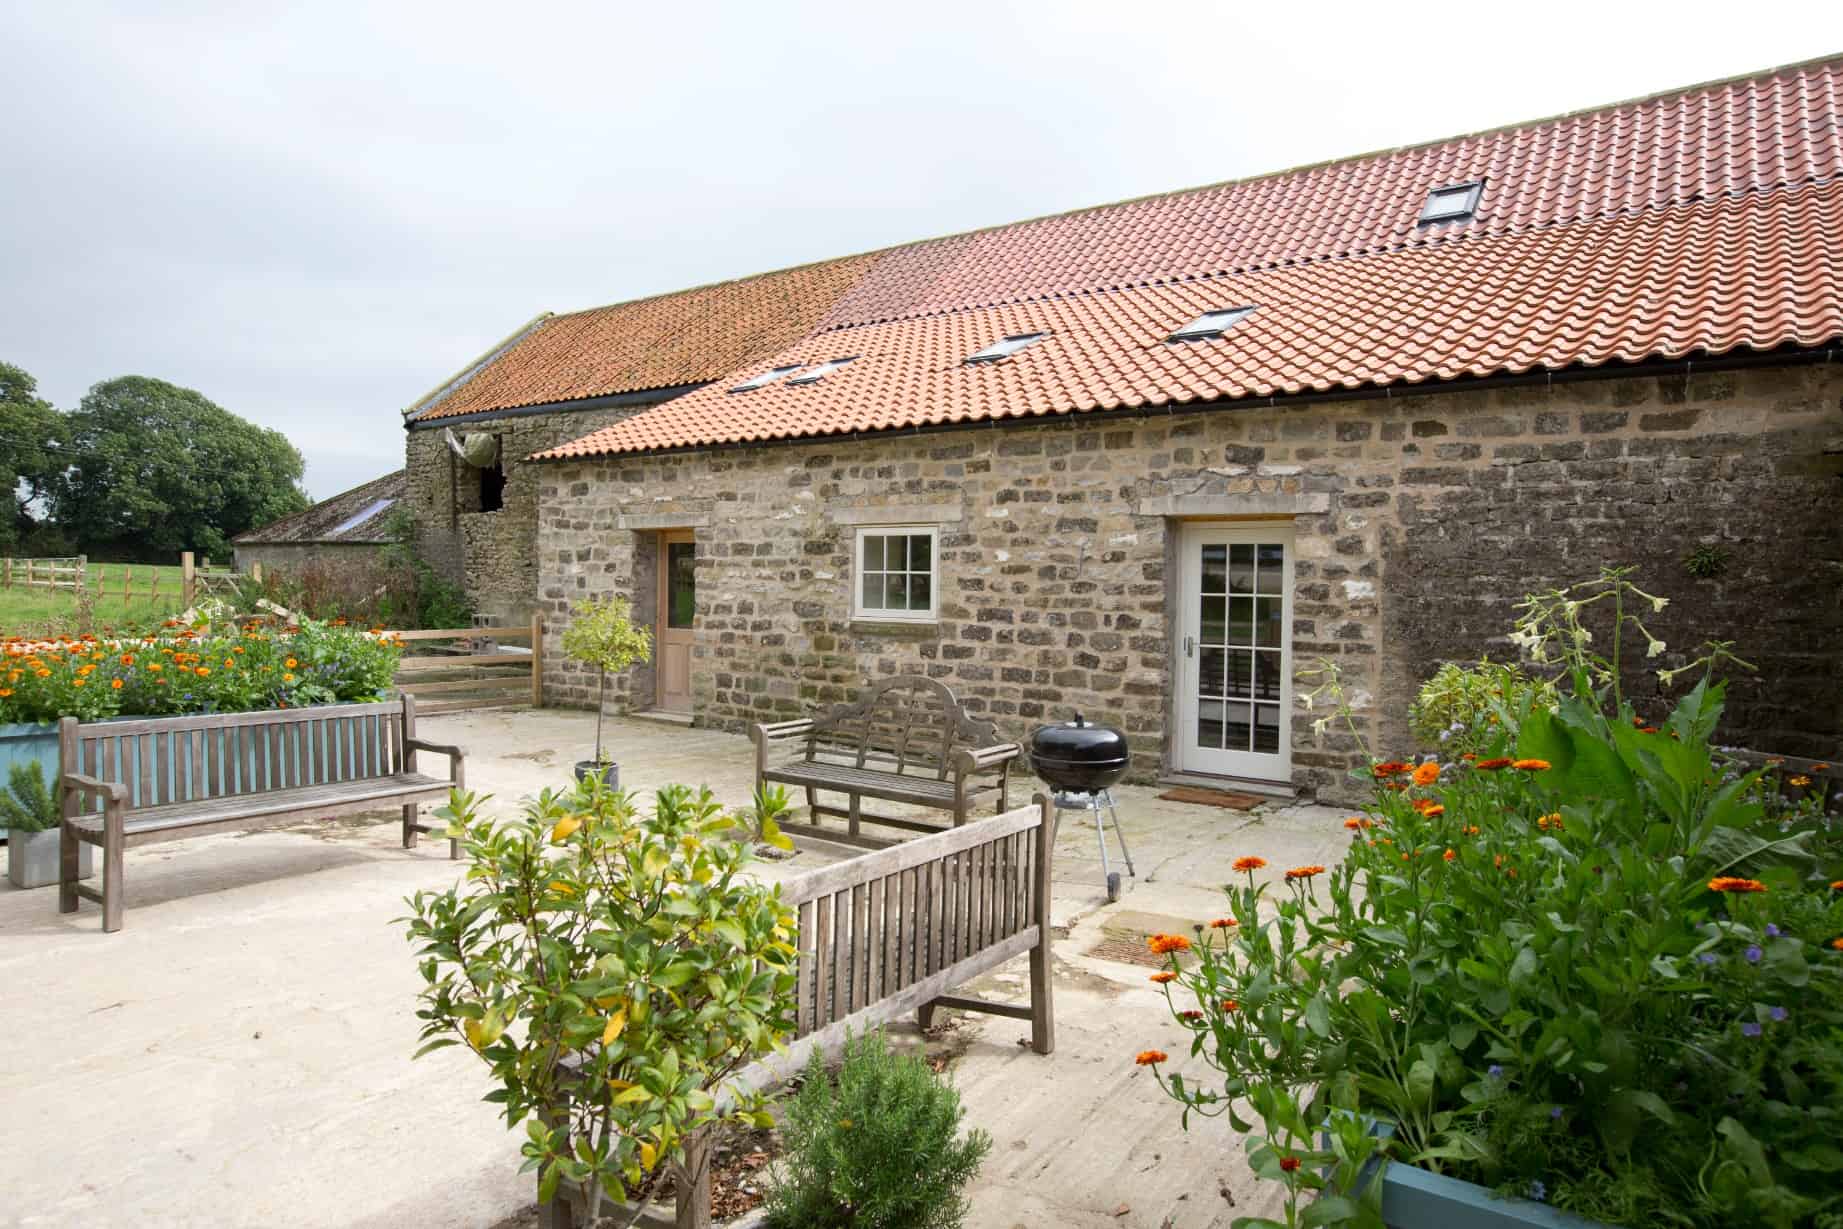 Dog Friendly Cottages Yorkshire Dales and Beyond ⋆